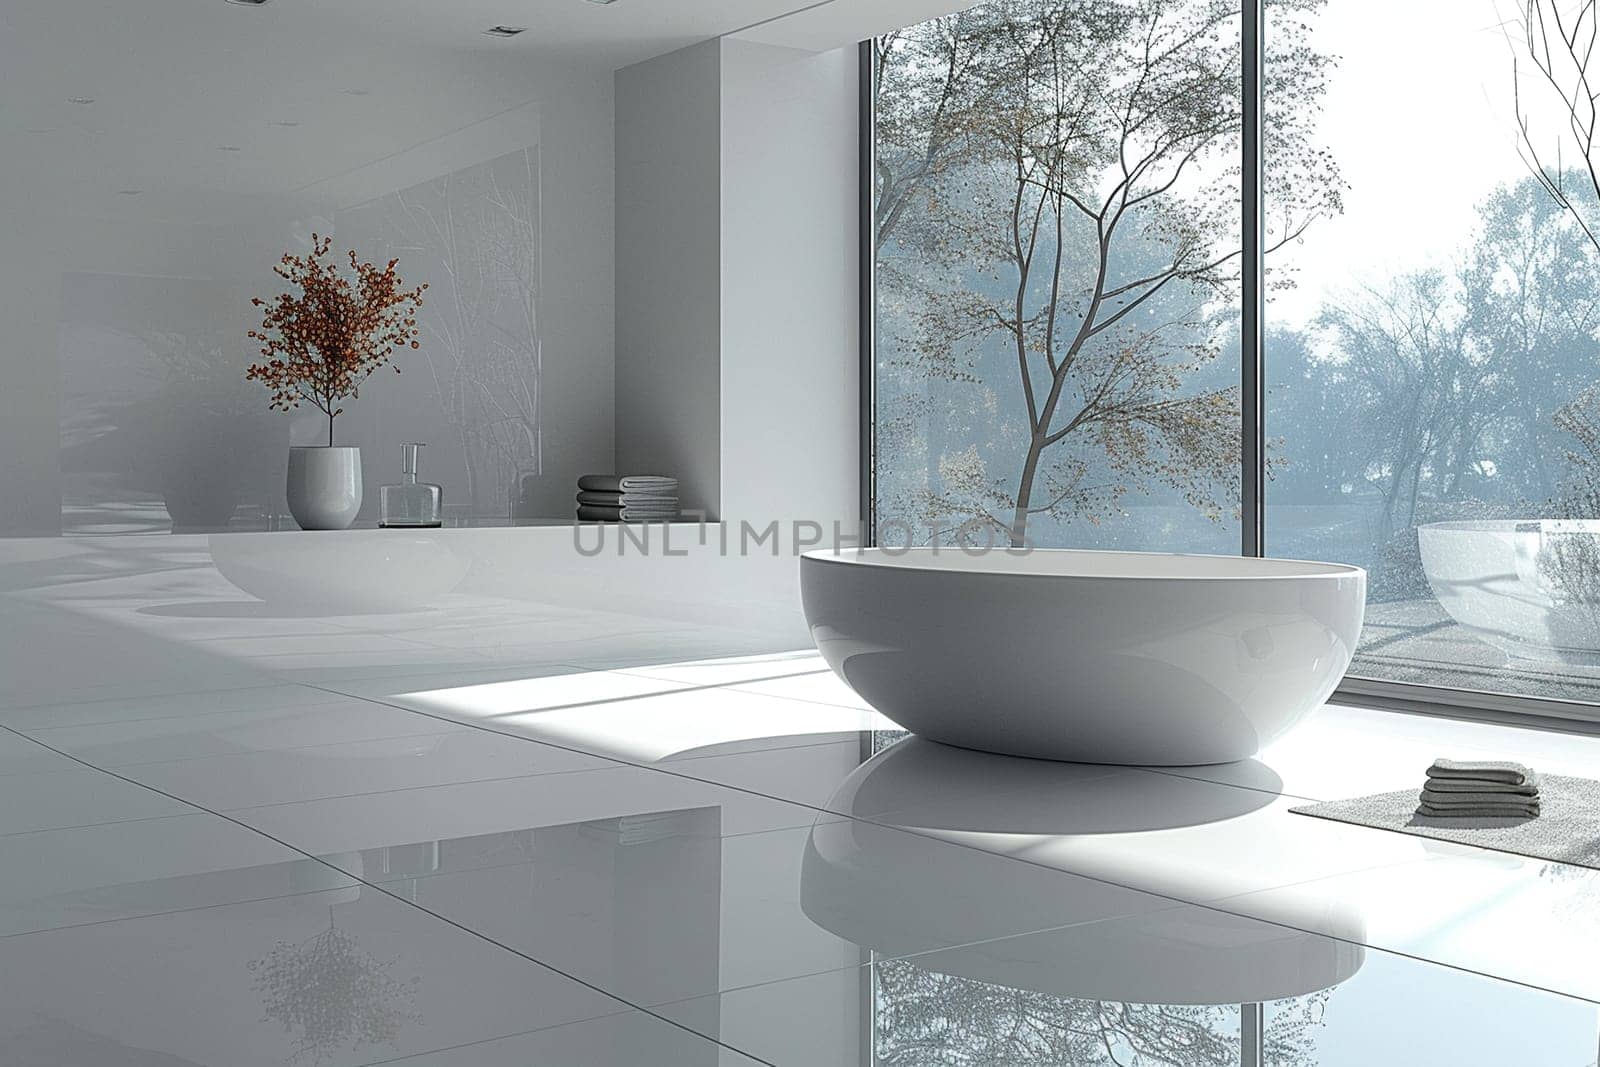 Modern minimalist bathroom with clean lines and monochromatic colors